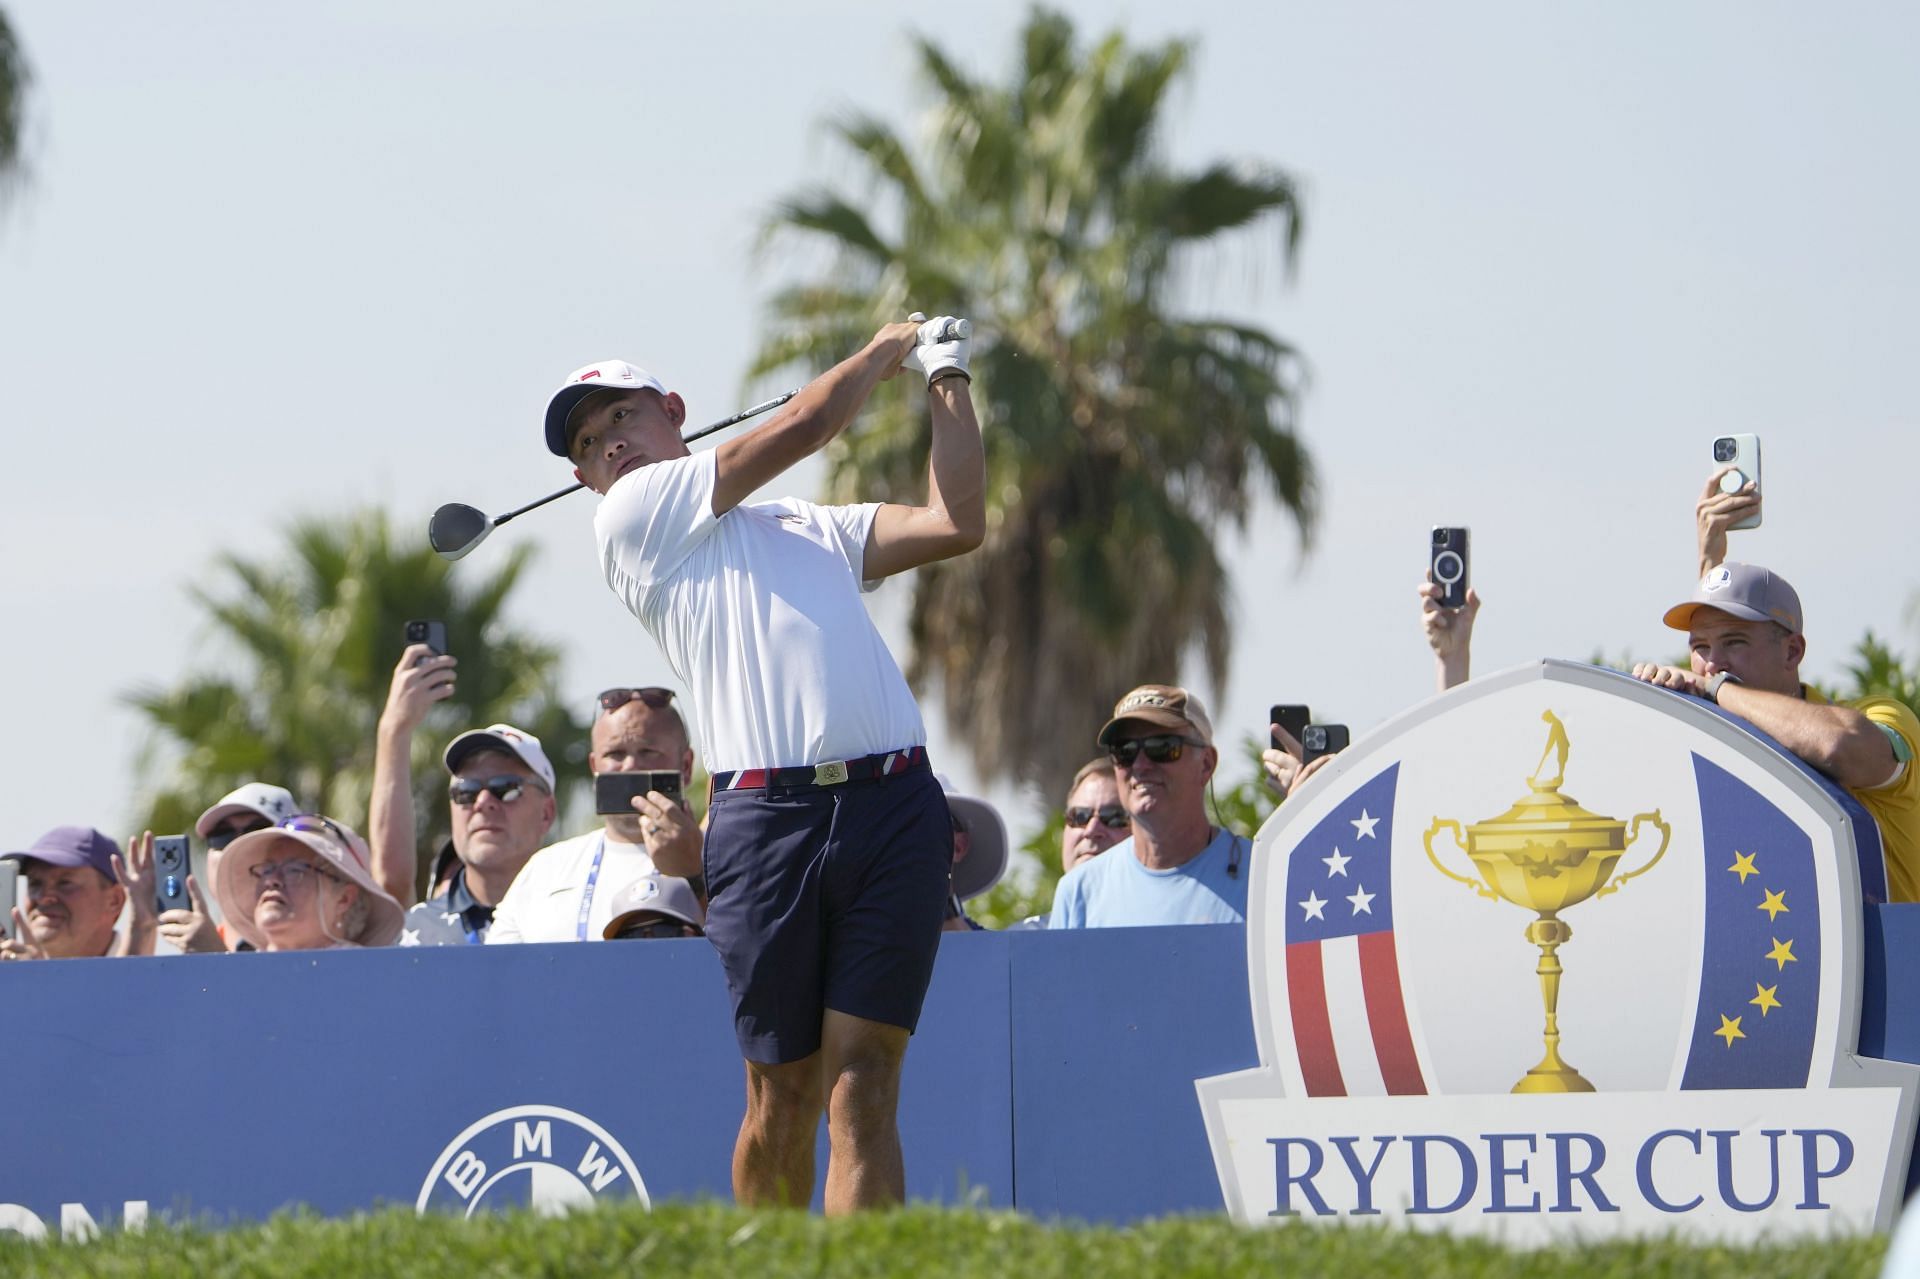 RYDER CUP FORMAT How does Ryder Cup scoring work? Scoring format and more